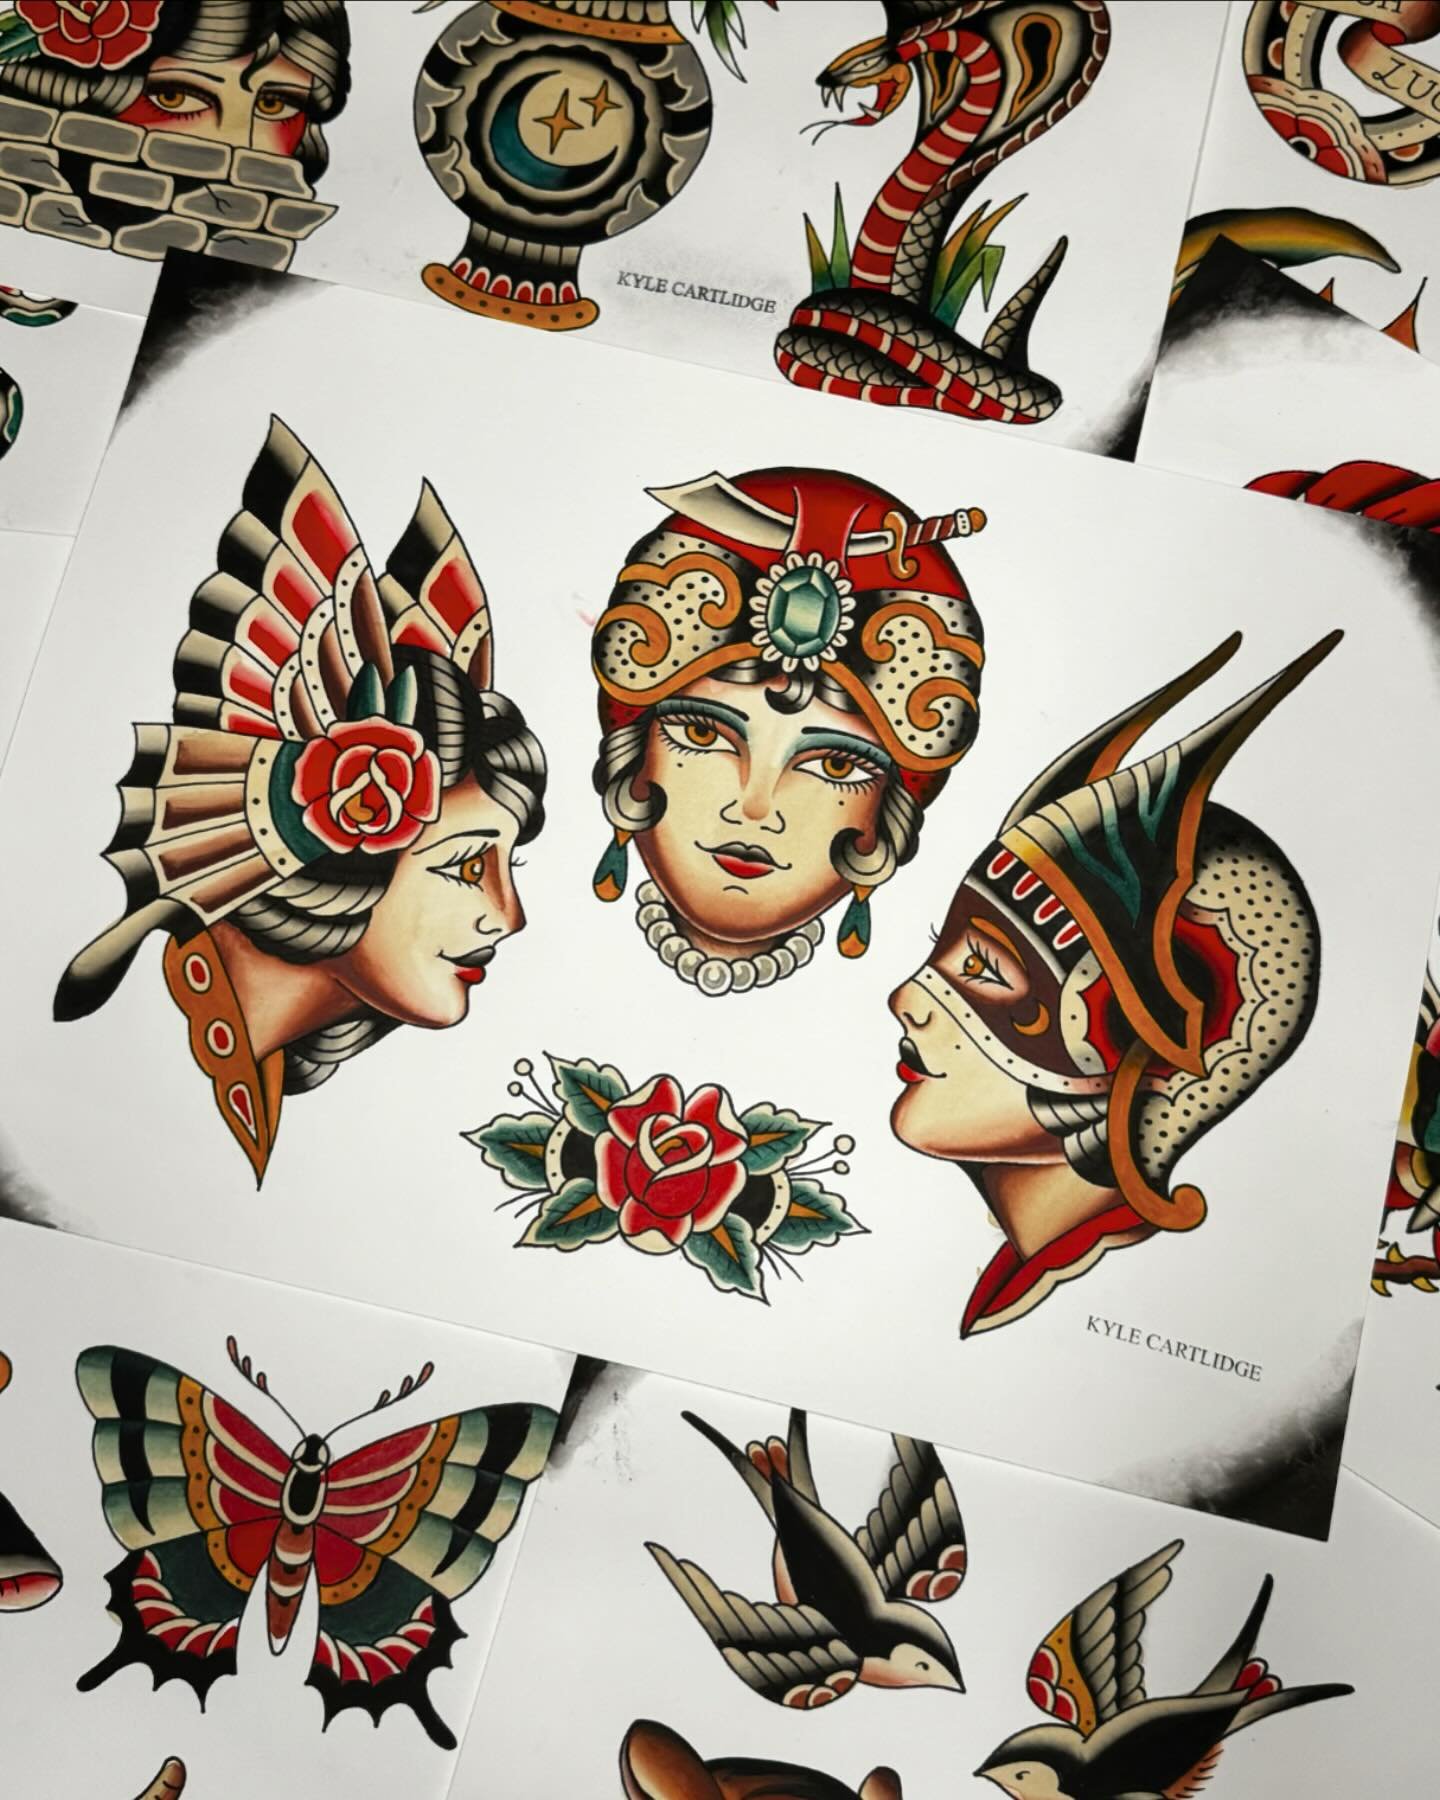 Some girl heads for your viewing pleasure. Always available colour or black, cheers!
.
.
.
.
.
#traditionaltattooflash #staffordshire #stokeontrent #newcastleunderlyme #cheshire